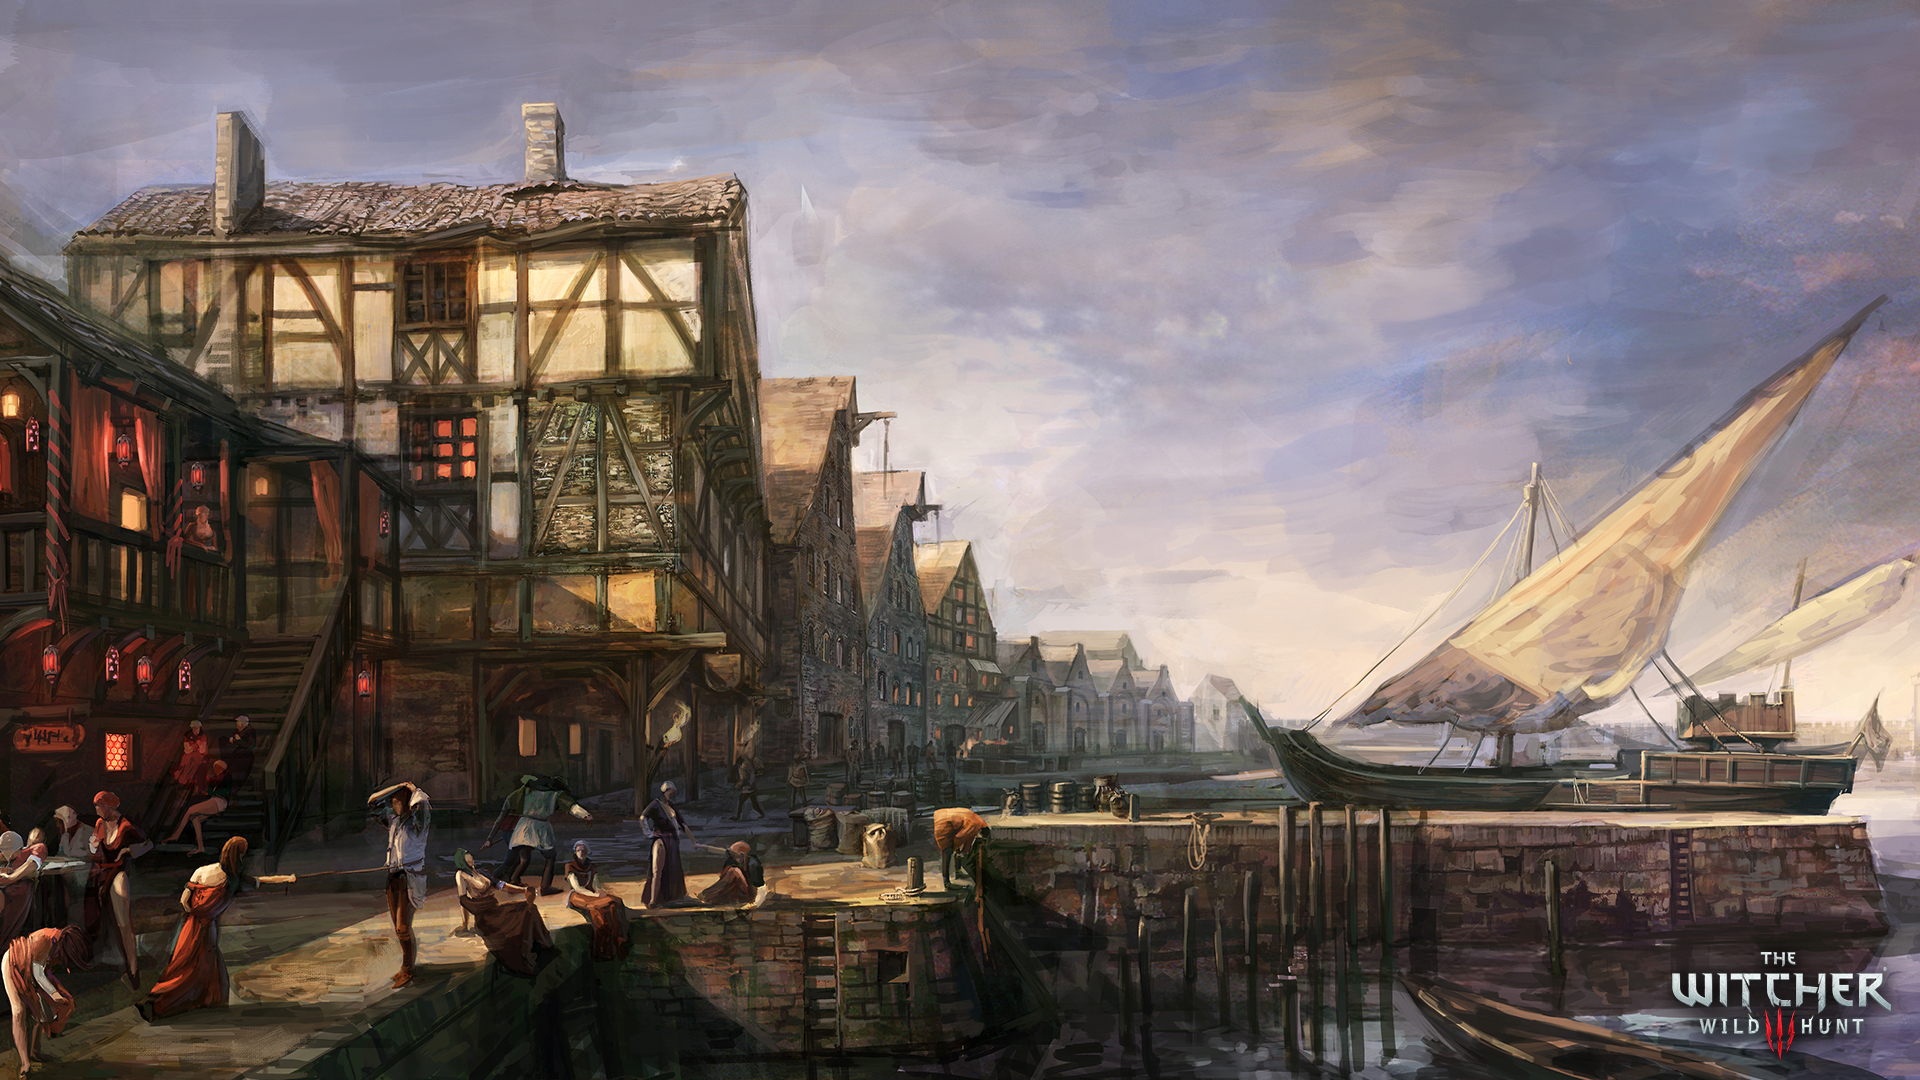 The Witcher The Witcher 3 Wild Hunt Fantasy Concept Art Town Novigrad The Witcher 1920x1080